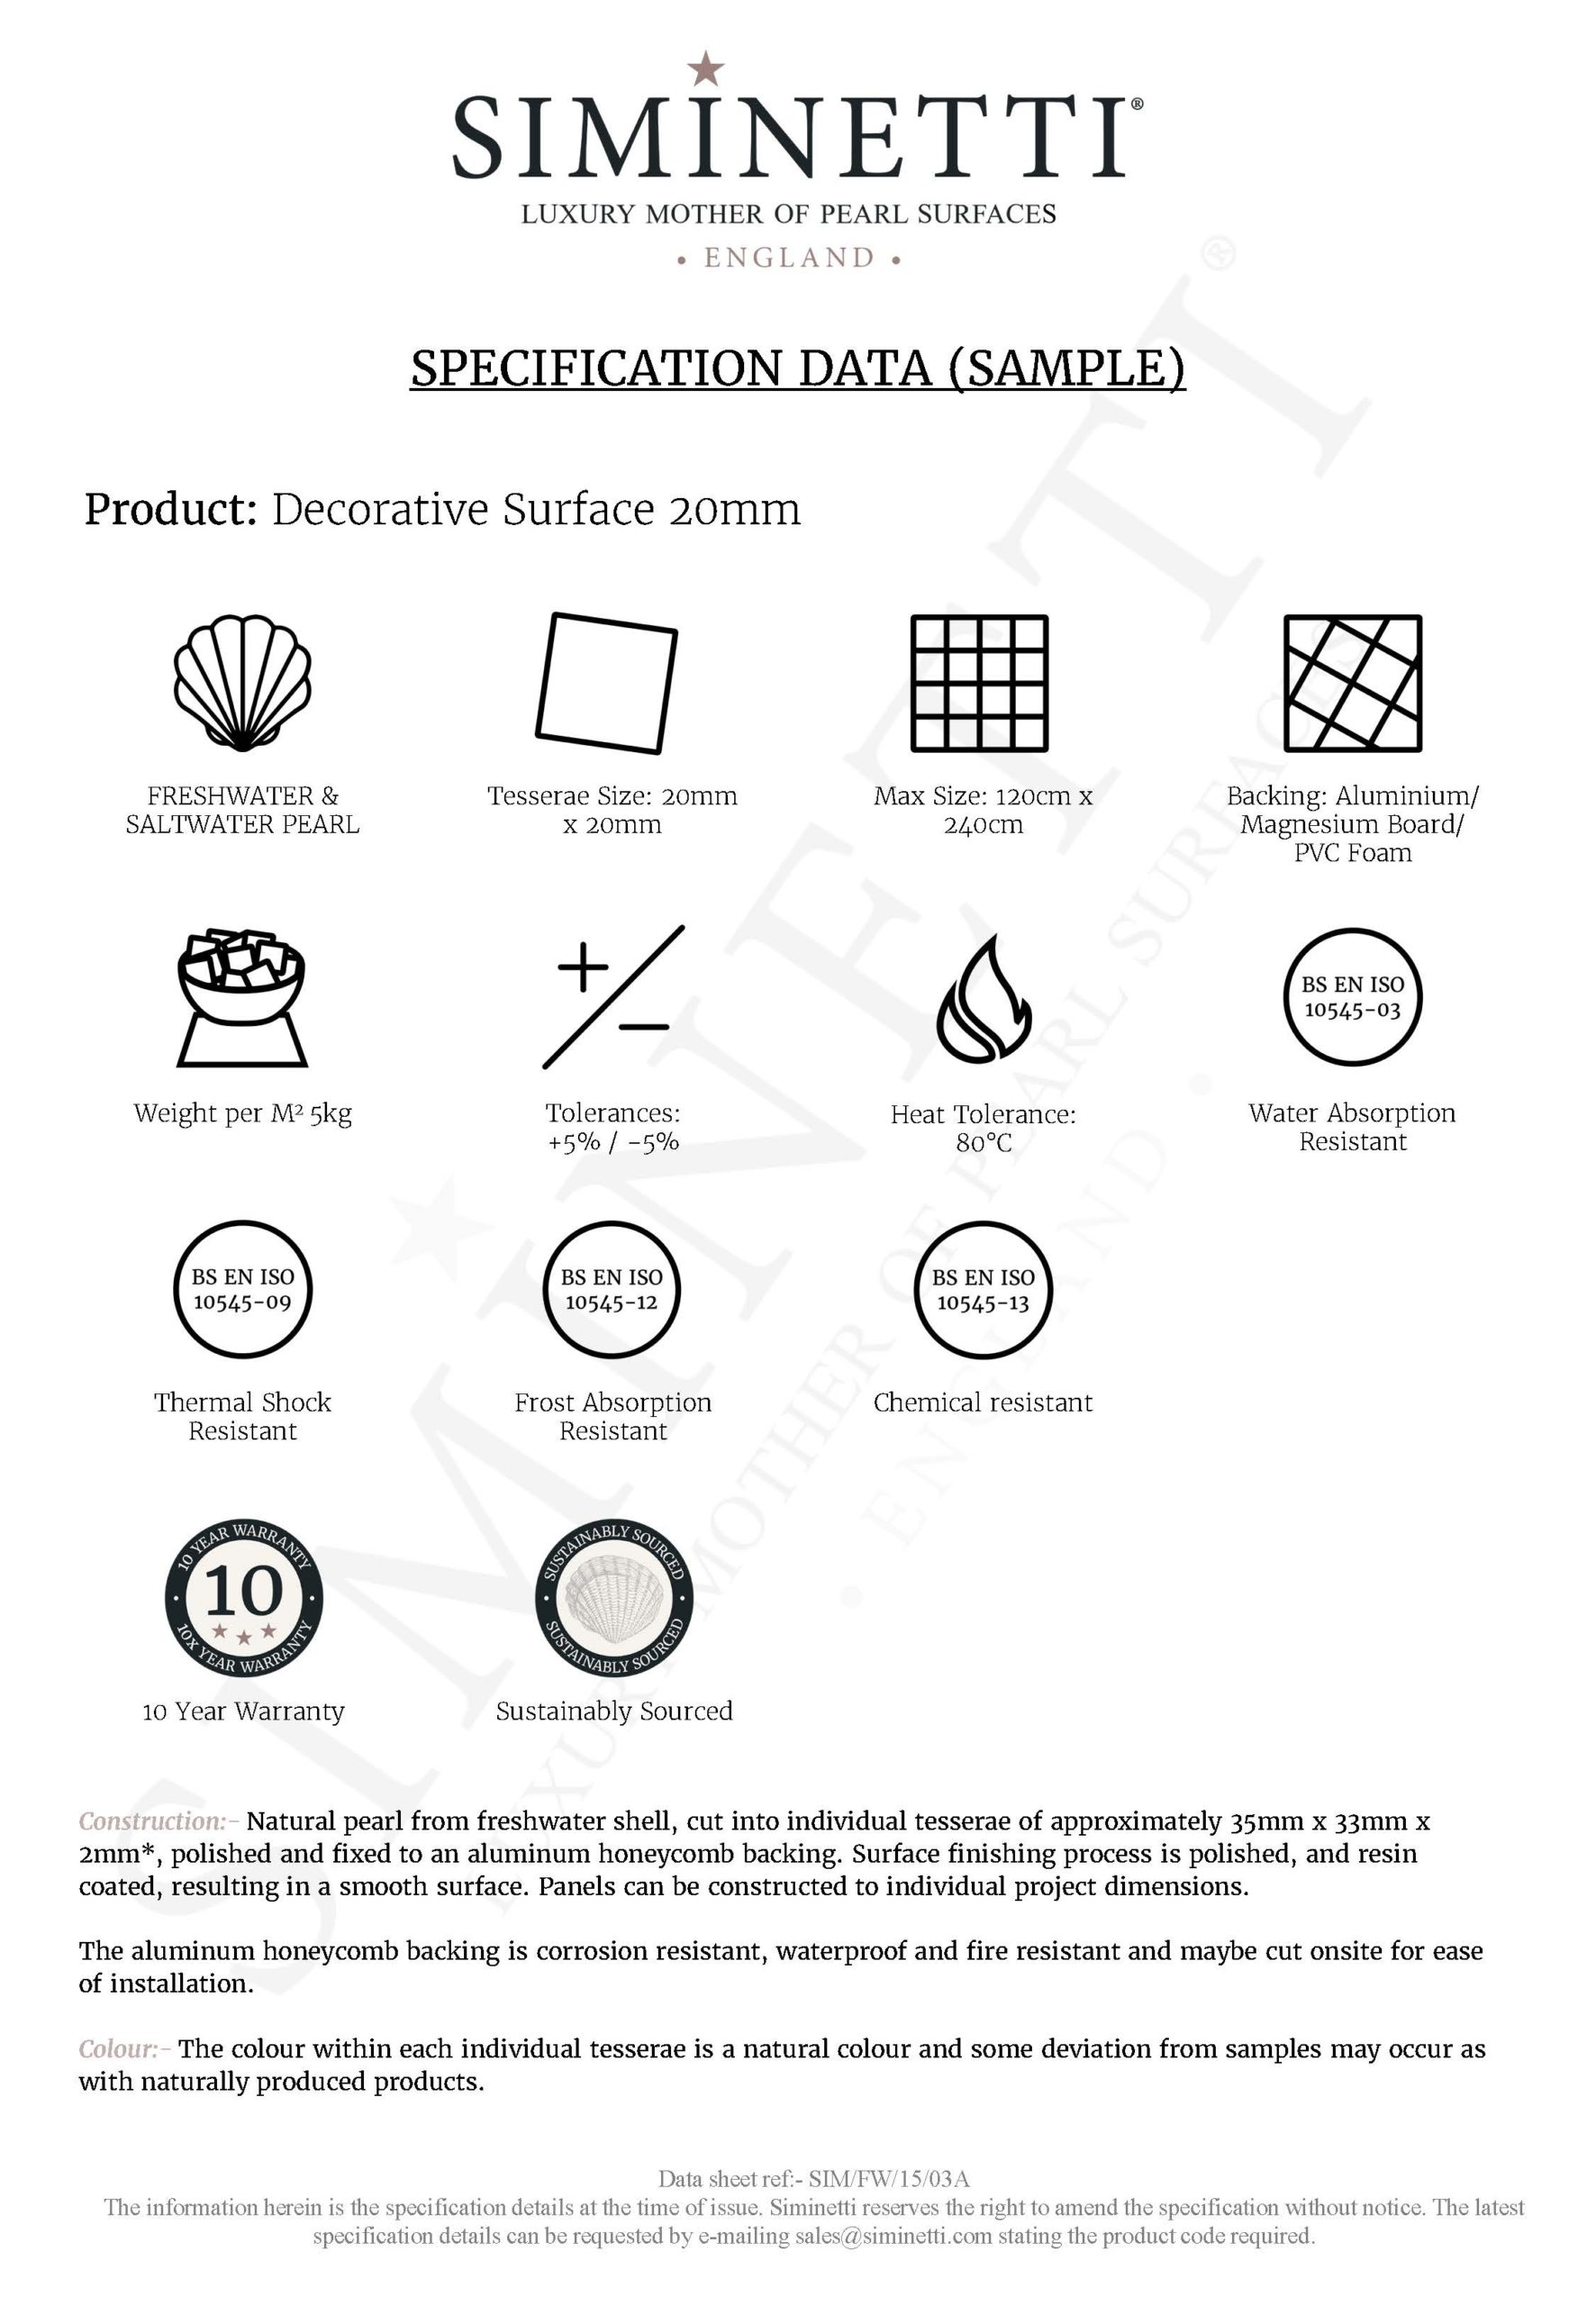 Decorative Surfaces Sample Specification